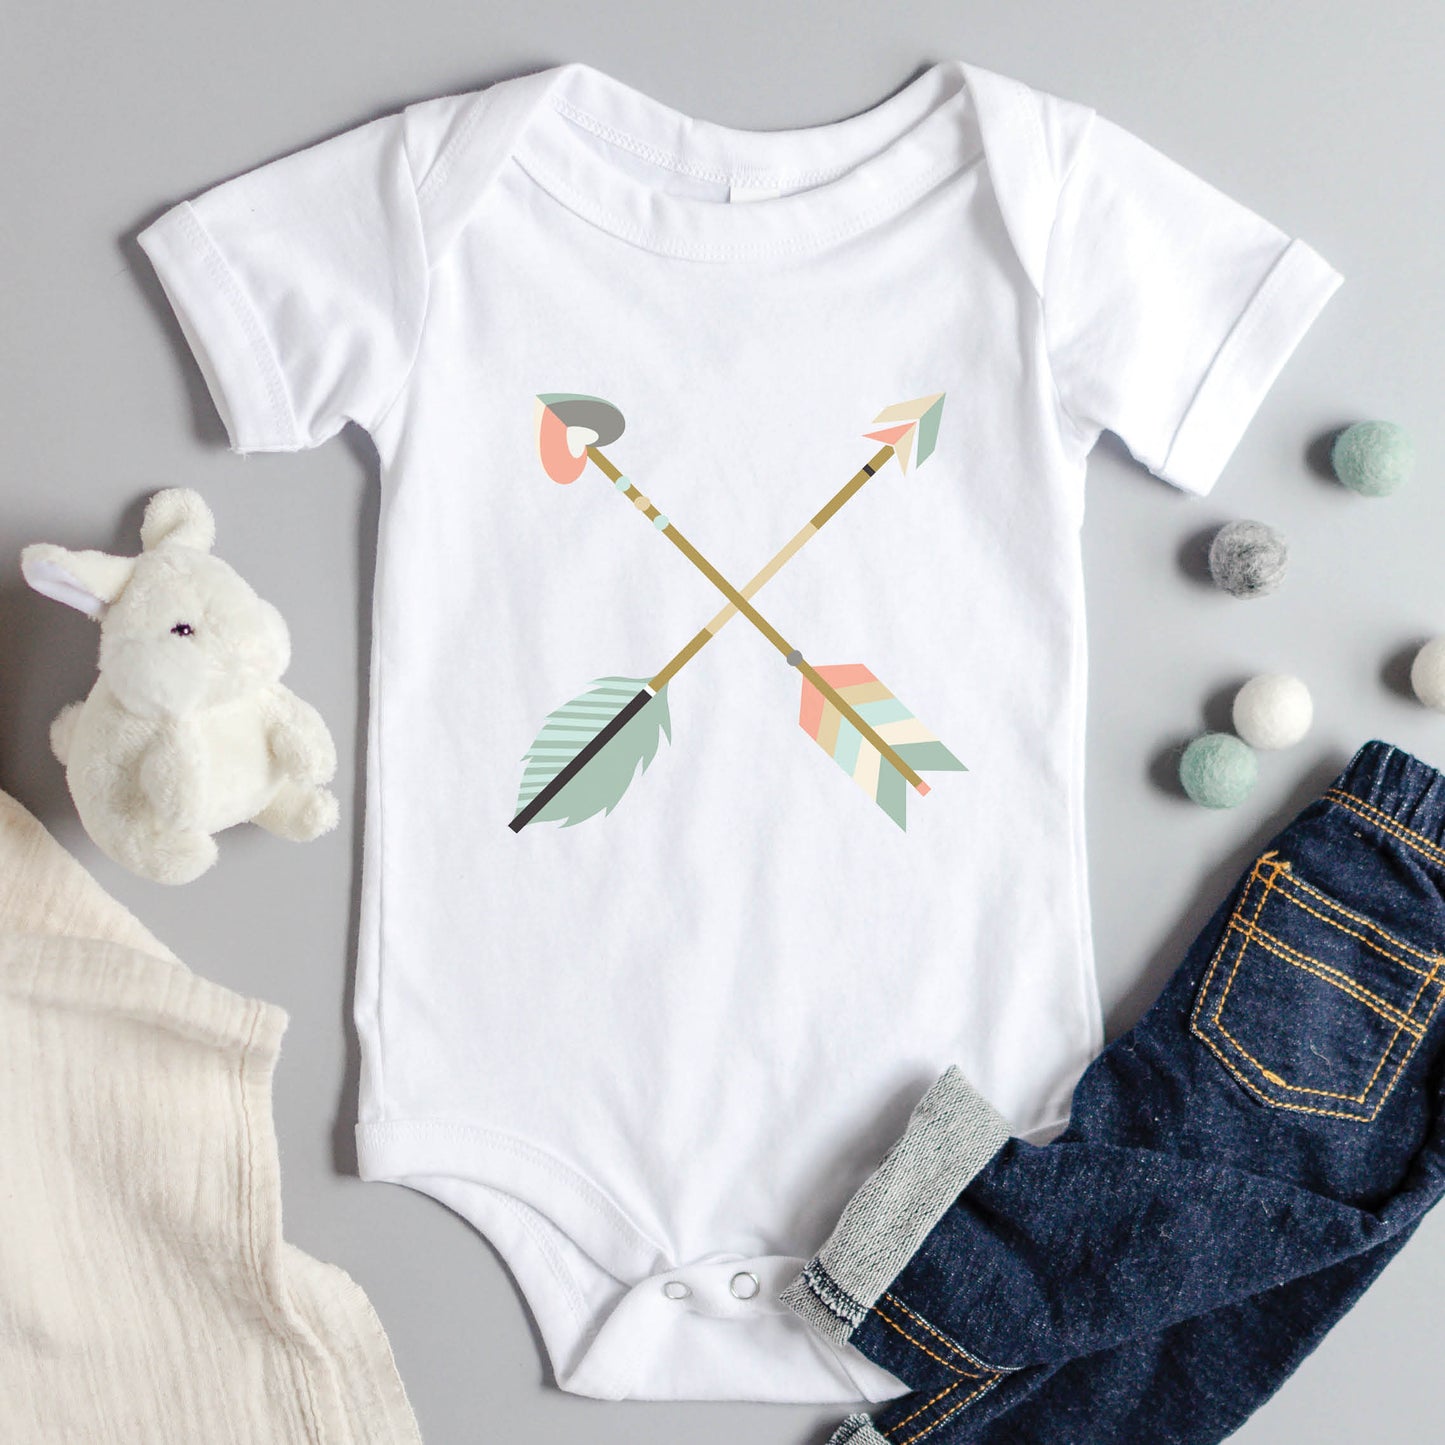 Cute Criss Cross boho arrows white baby onesie bodysuit for boys and girls, matching mommy-and-me Christian Raising Arrows Psalm 127:4-5 scripture faith-based Mom T-Shirt